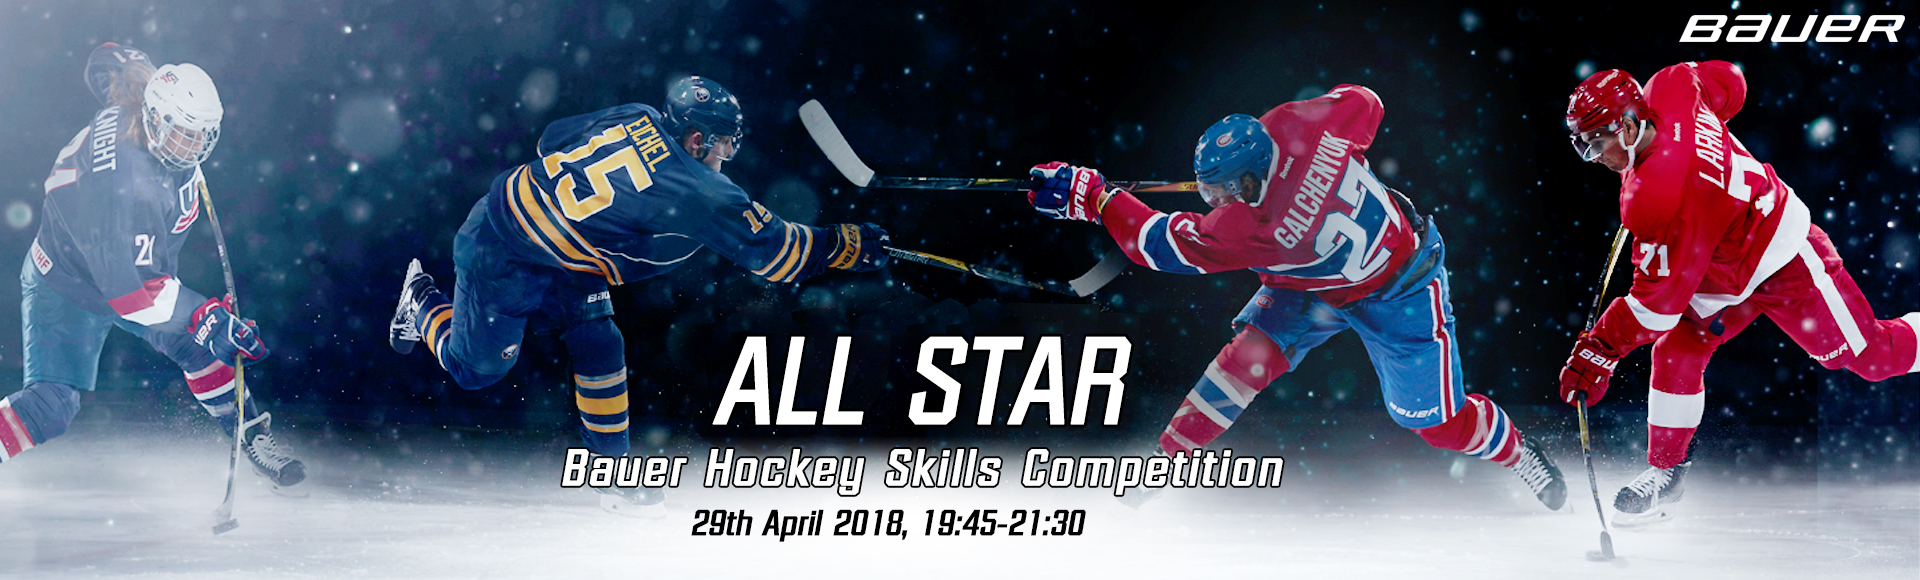 ALL STAR Bauer Hockey Skills Competition